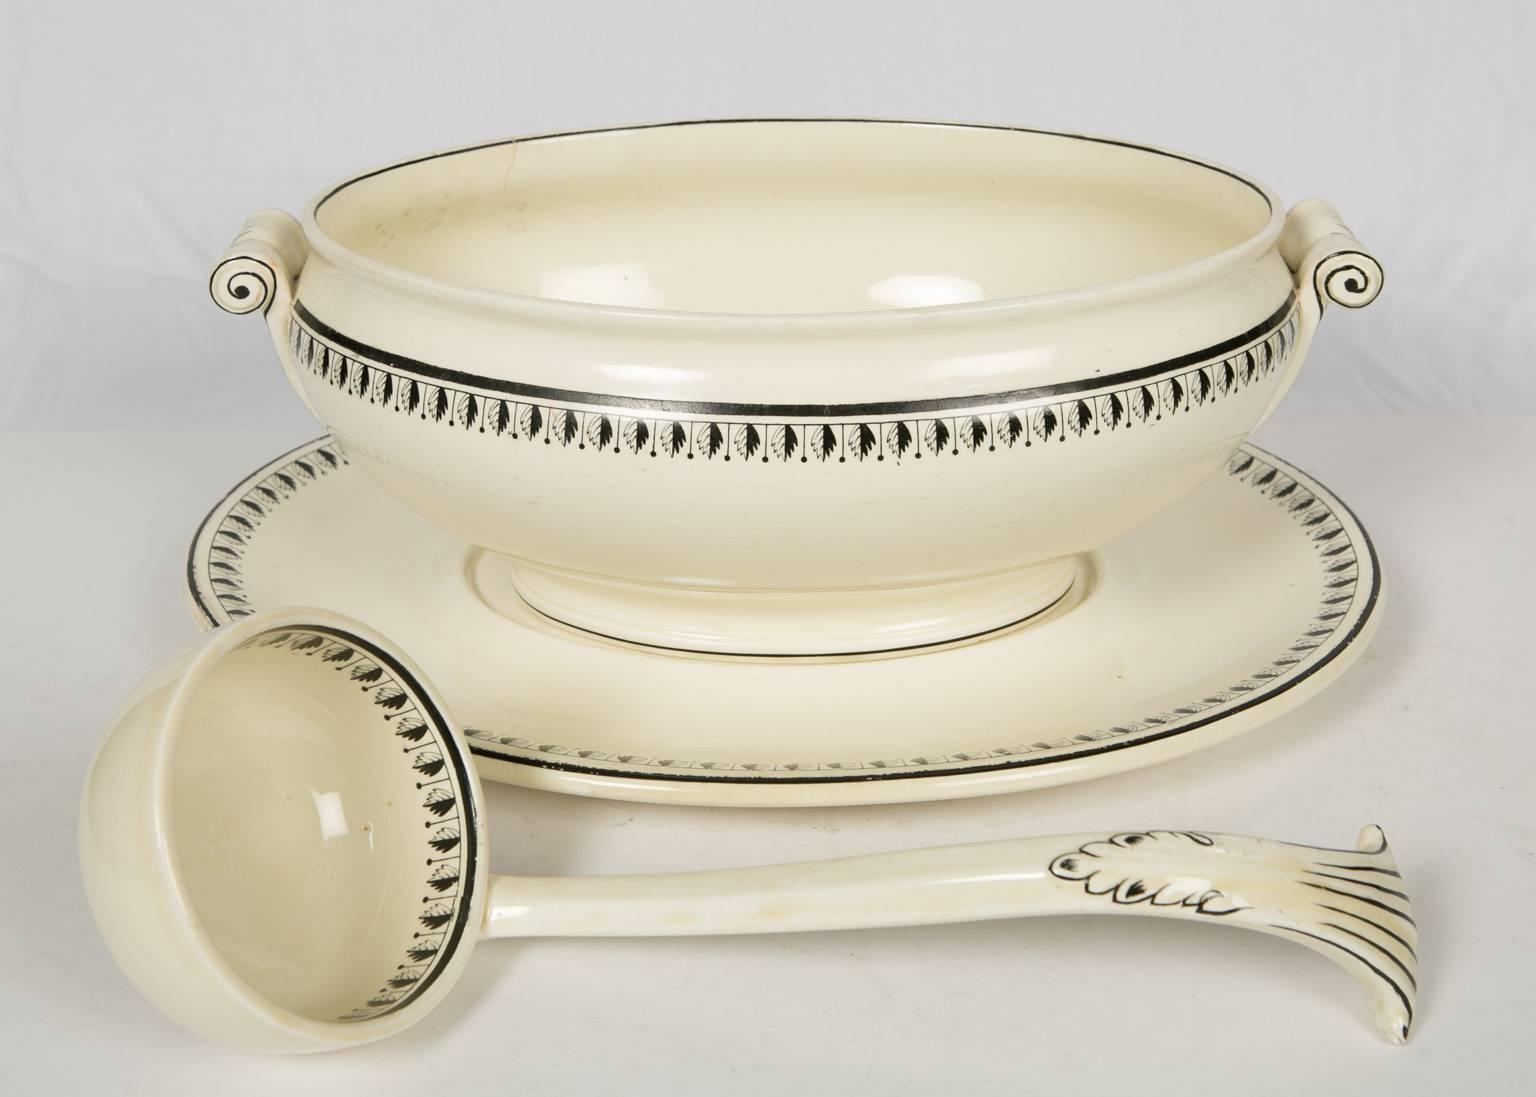 Aesthetic Movement Wedgwood Creamware Soup Tureen with Ladle IN STOCK